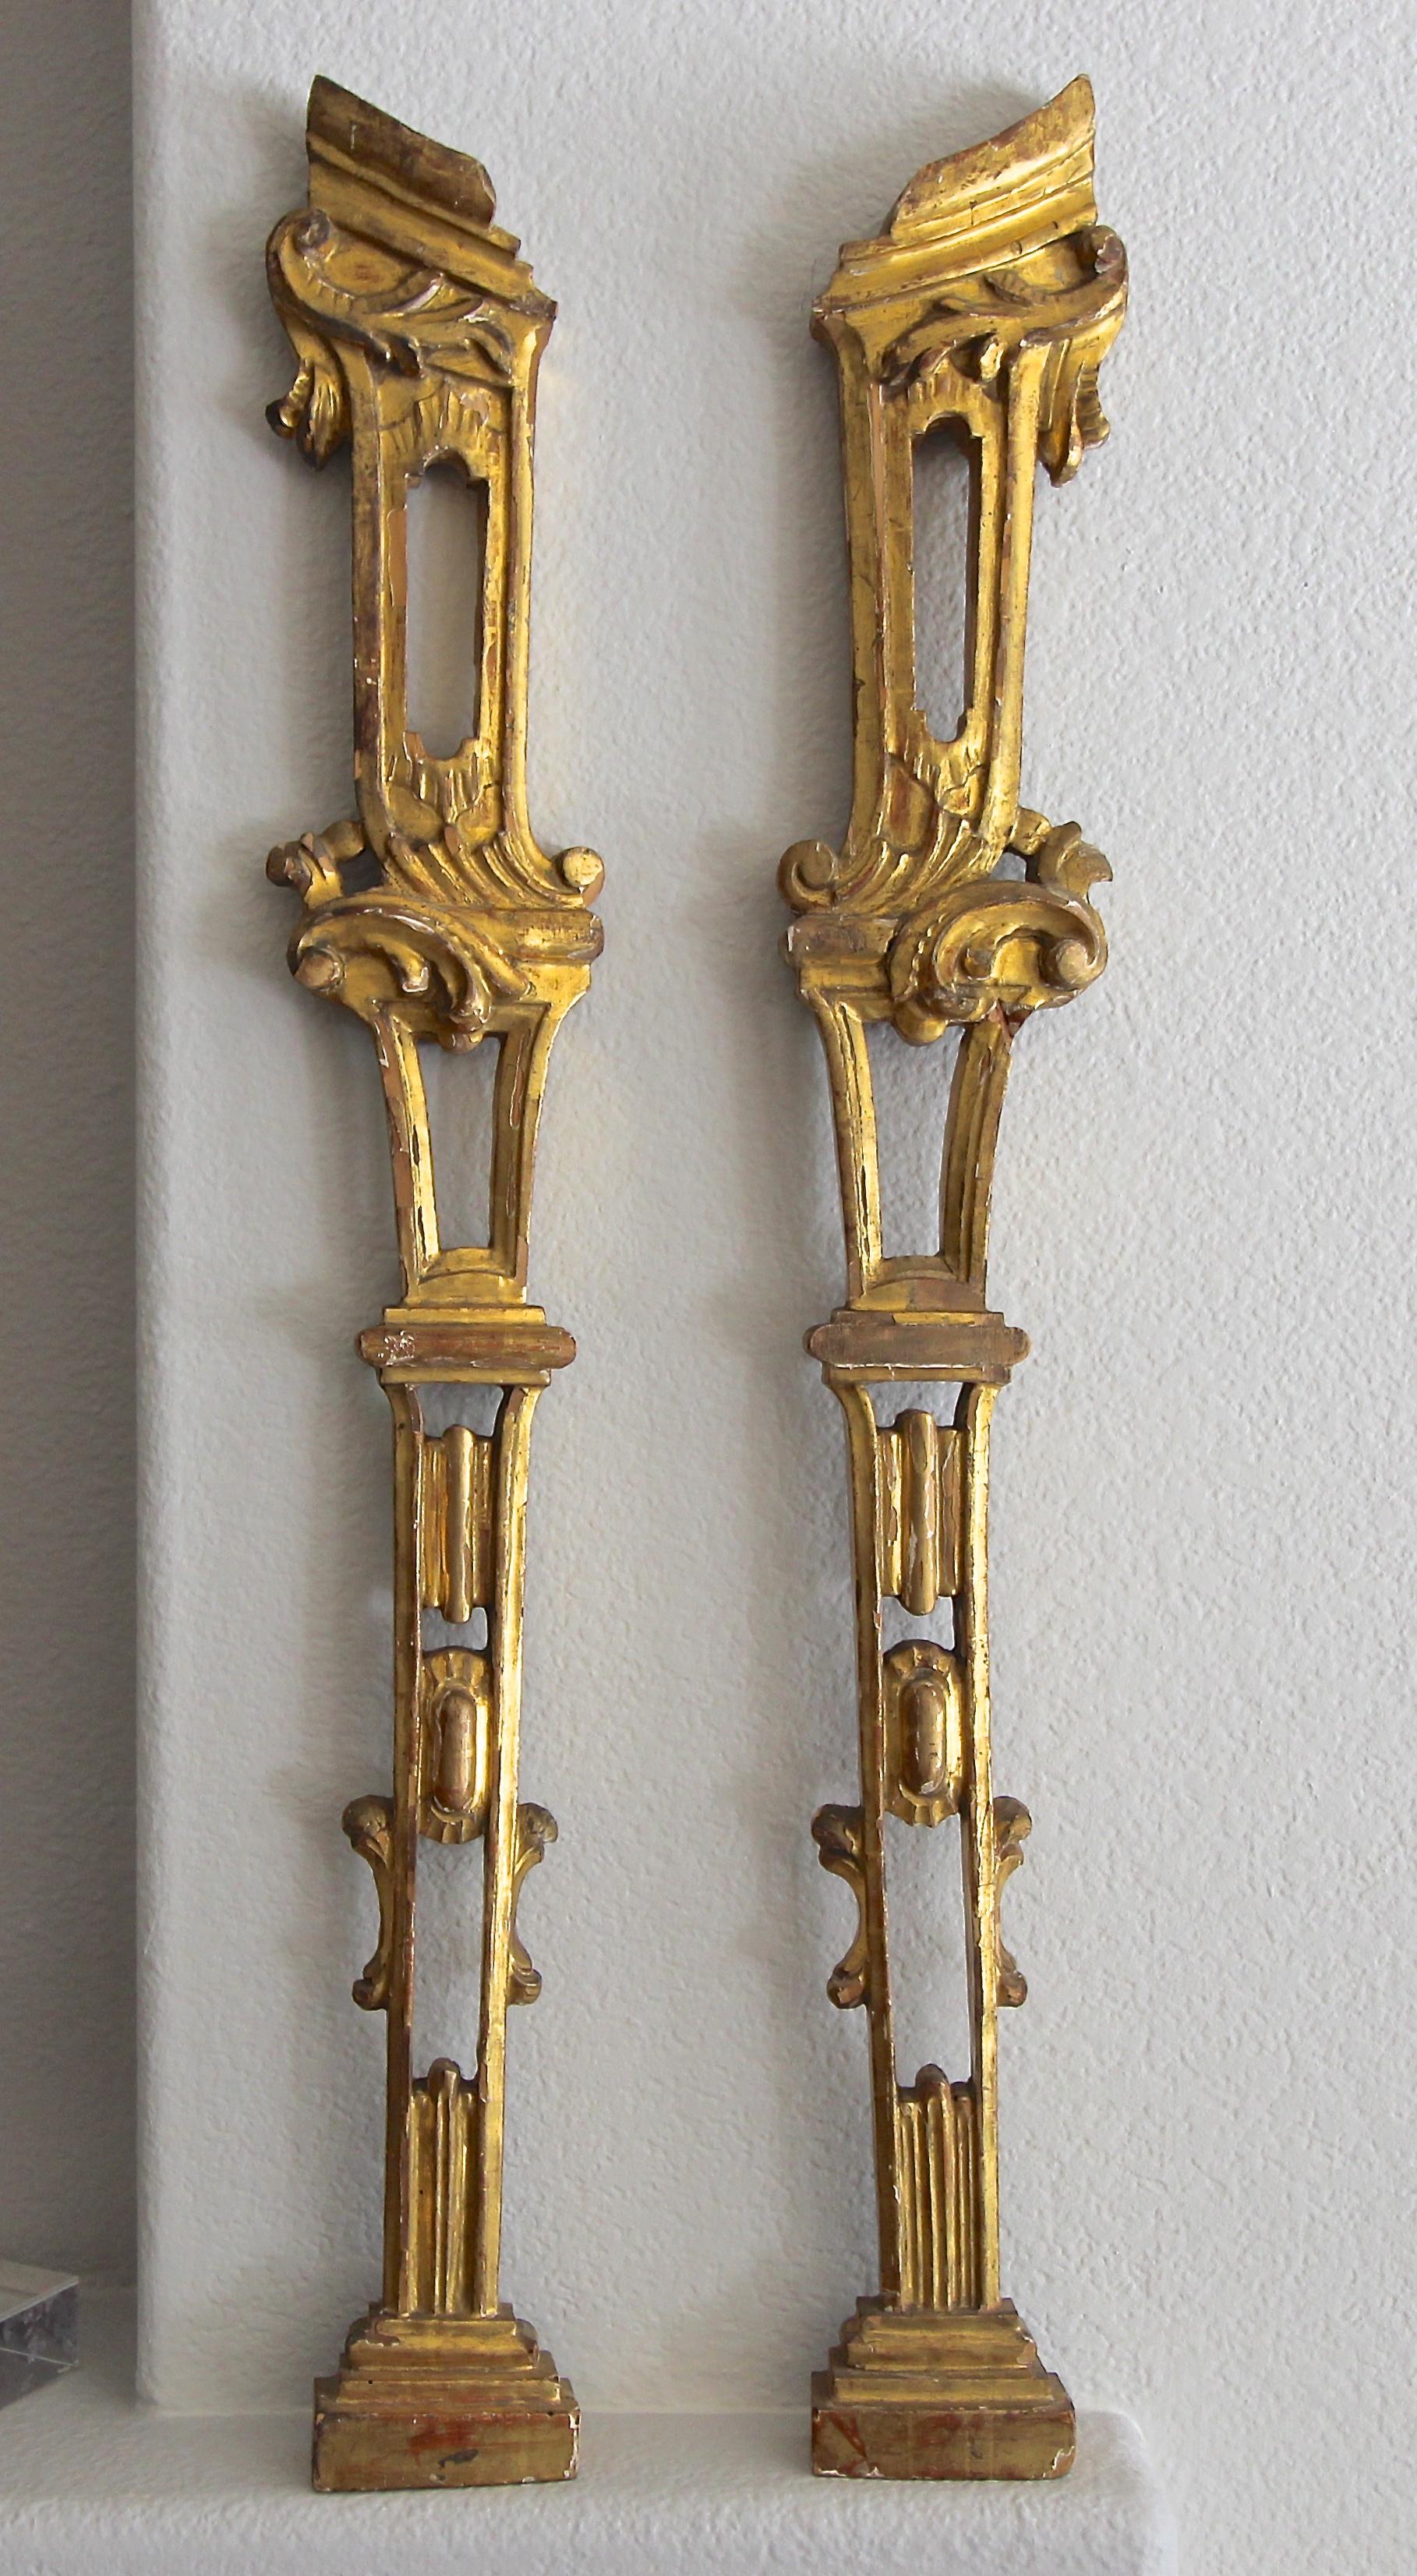 Pair of tall 19th century French architectural carved giltwood fragments wall art. Great accent pieces for modern and traditional decor settings.
 